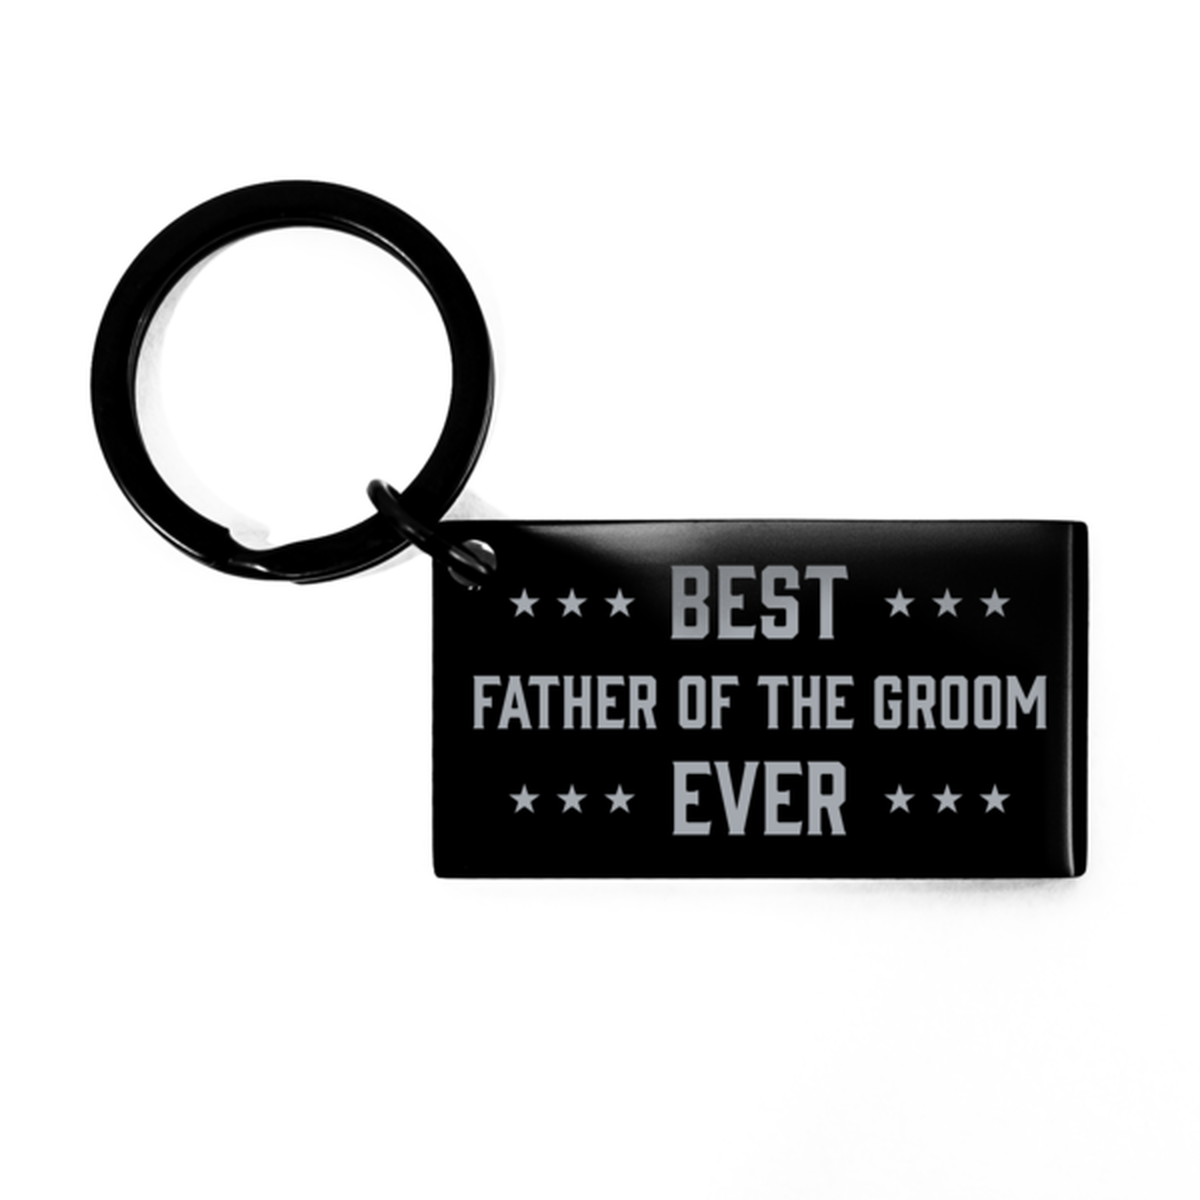 Best Father of the groom Ever Father of the groom Gifts, Funny Black Keychain For Father of the groom, Birthday Engraved Keyring Presents For Men